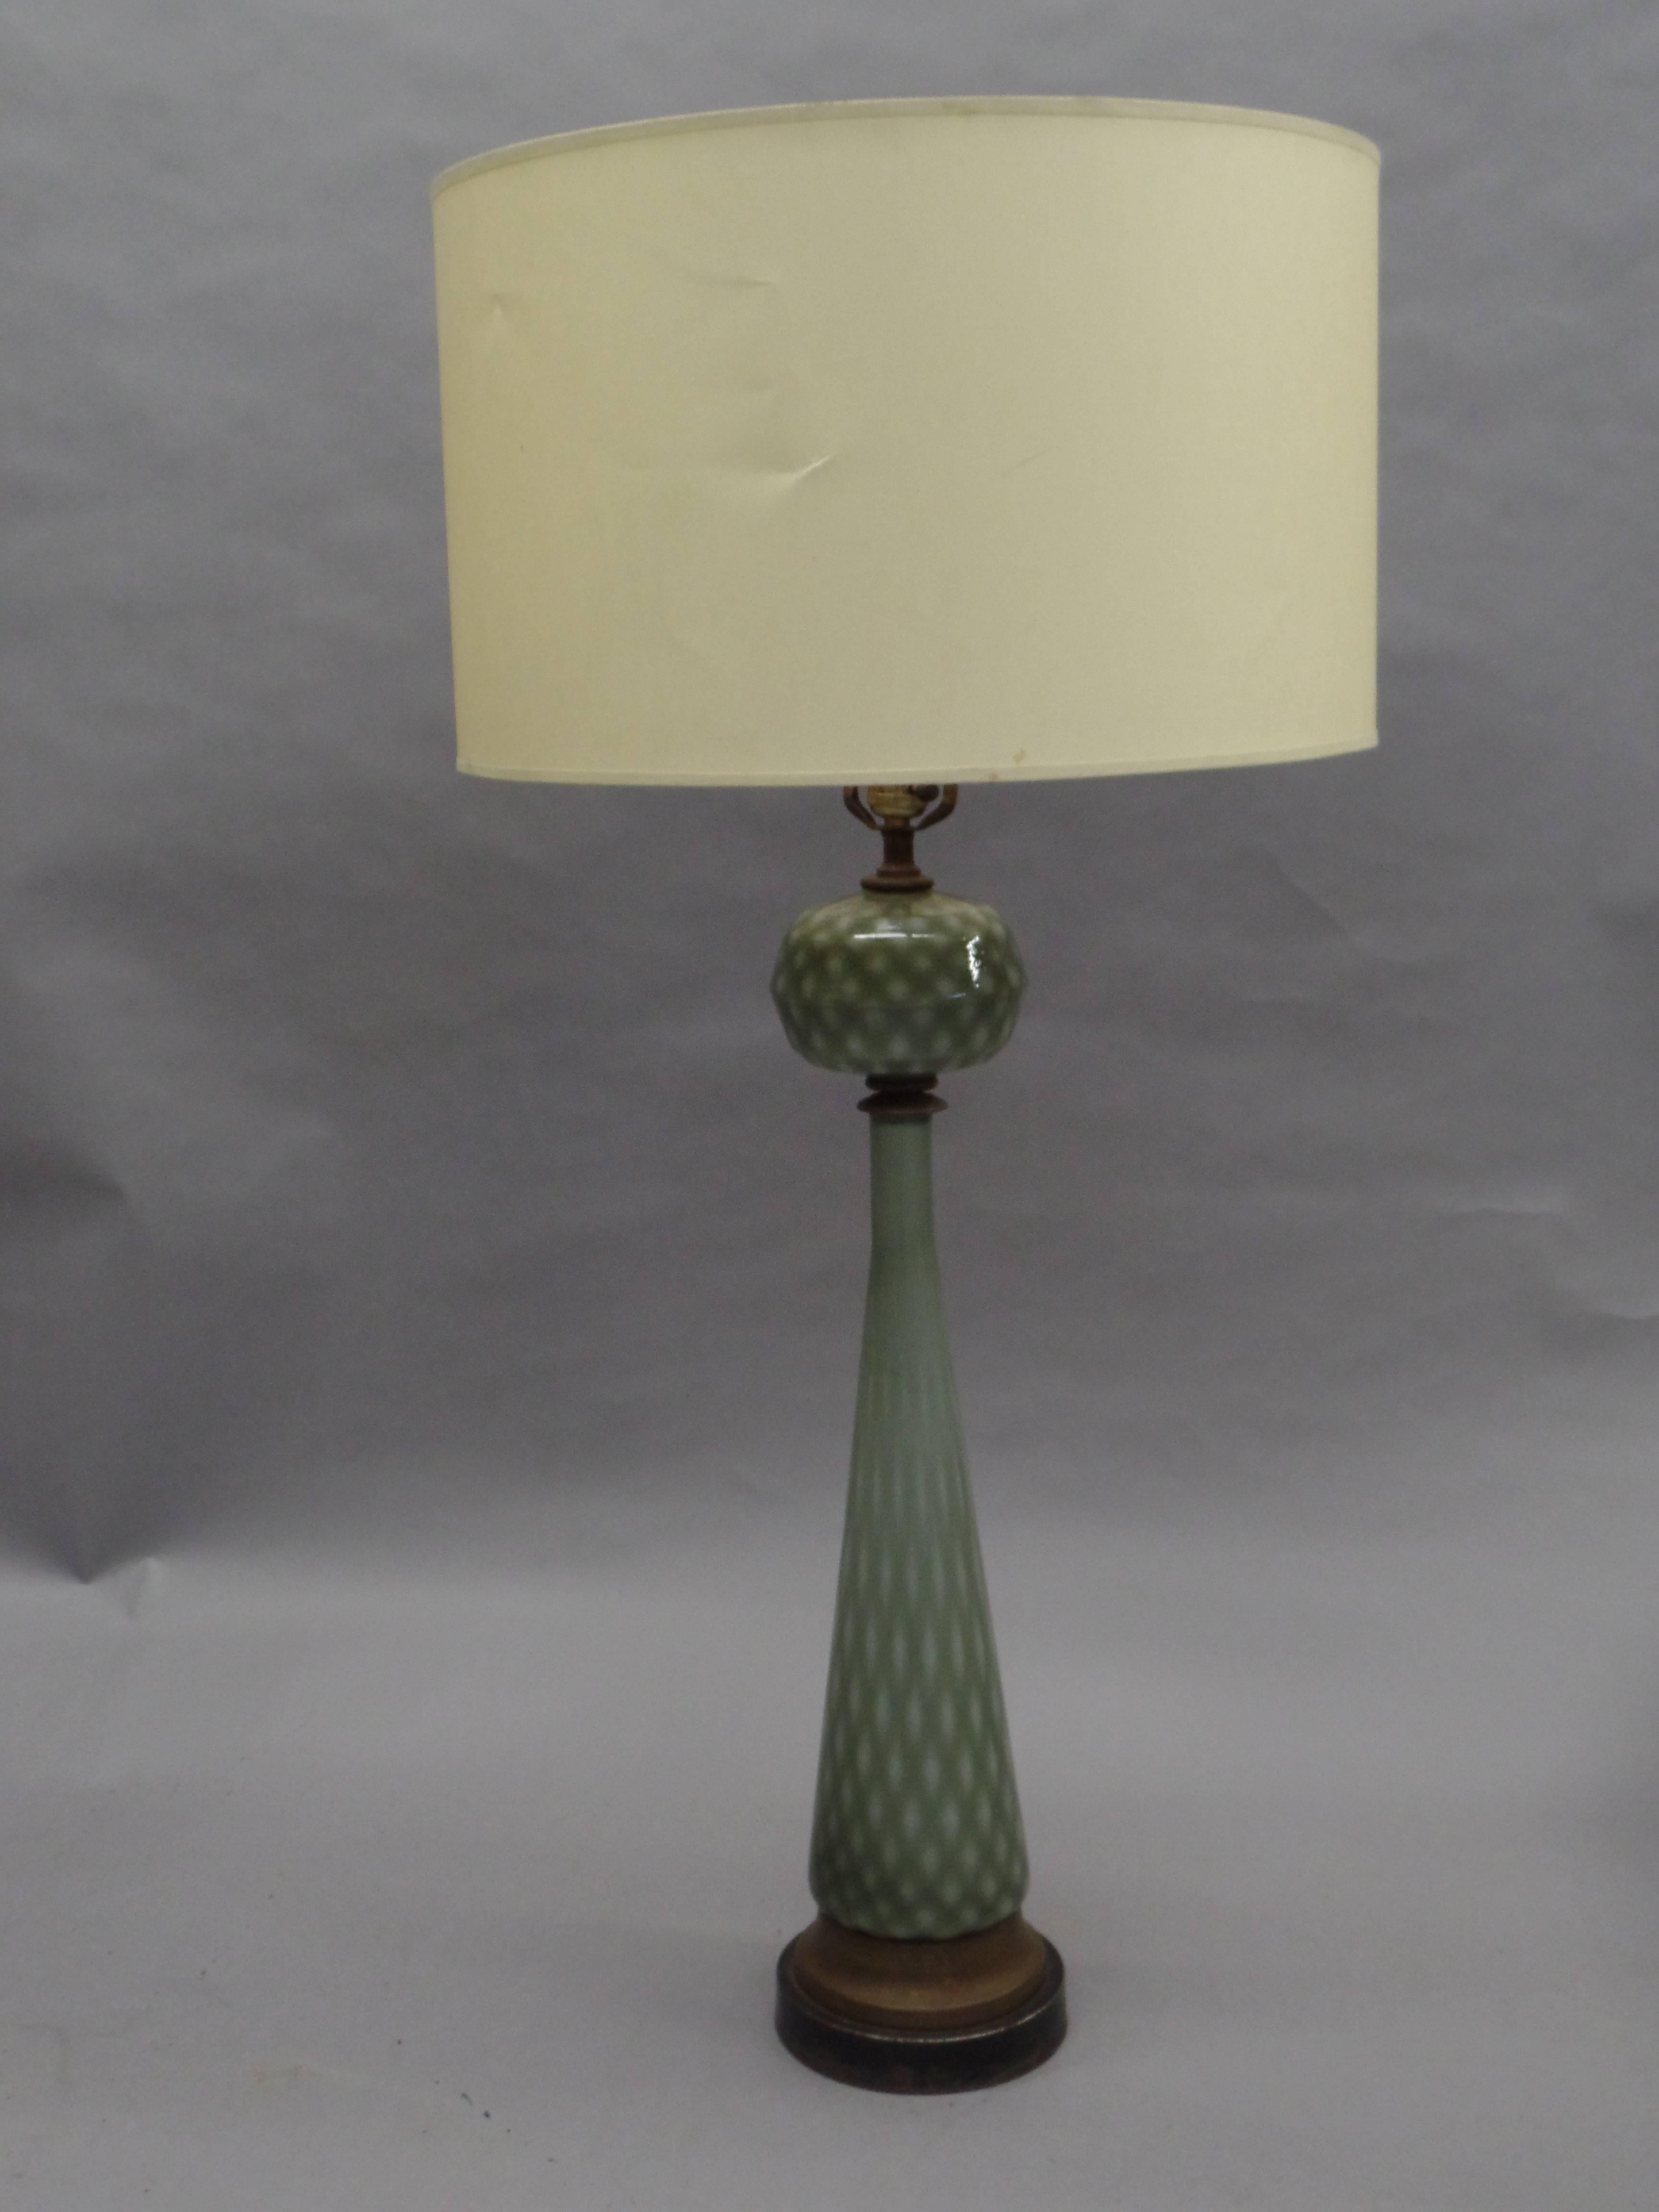 Pair of rare Italian Mid-Century handblown Venetian glass table lamps attributed to Barovier e Toso. Their unusual form has both a modern and neoclassical appeal.

Height shown is 43